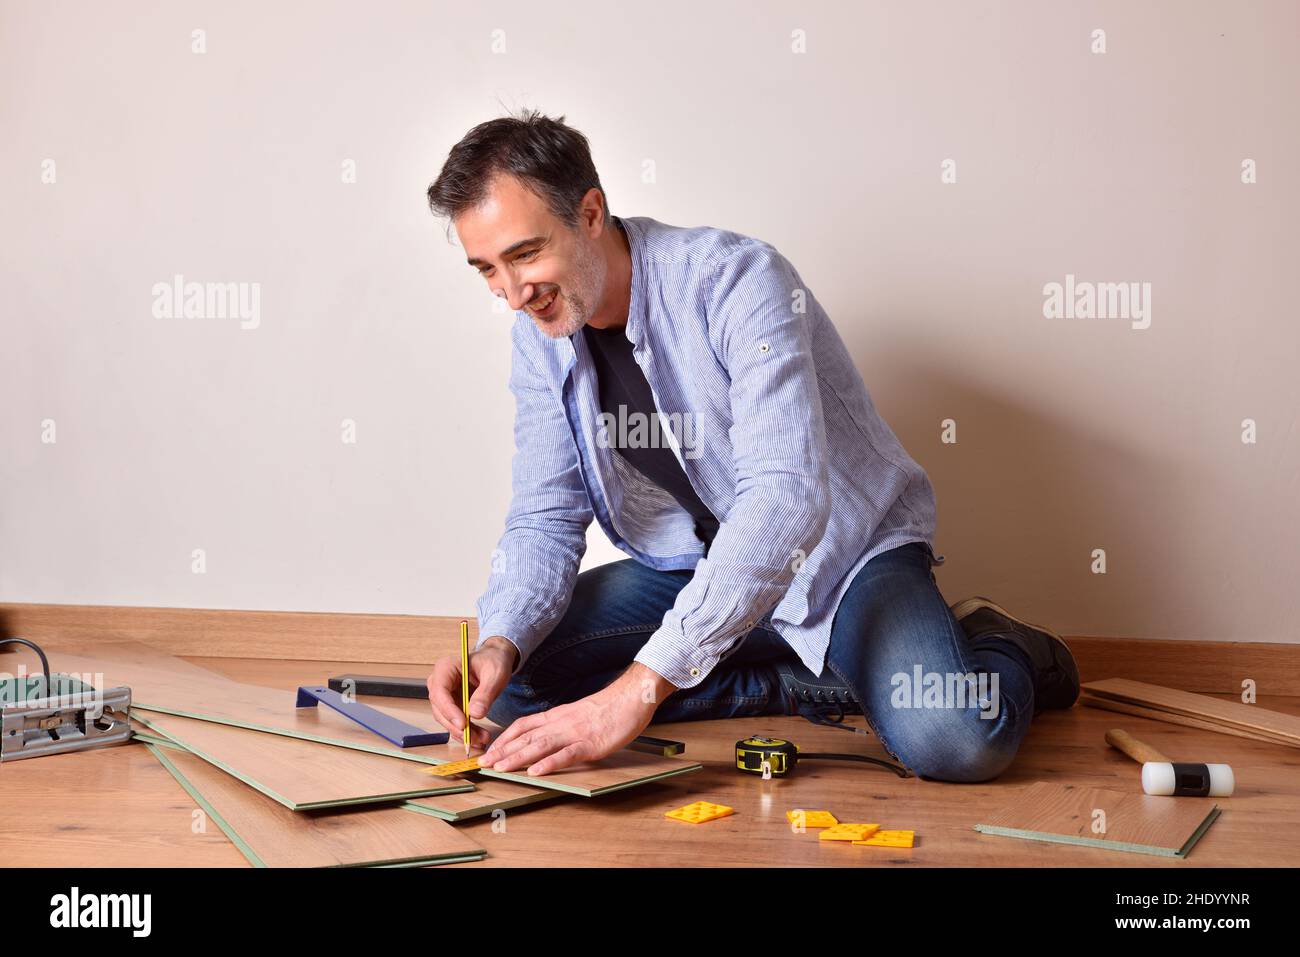 Smiling man sitting on the floor measuring laminate parquet in his own home. Horizontal composition. Stock Photo